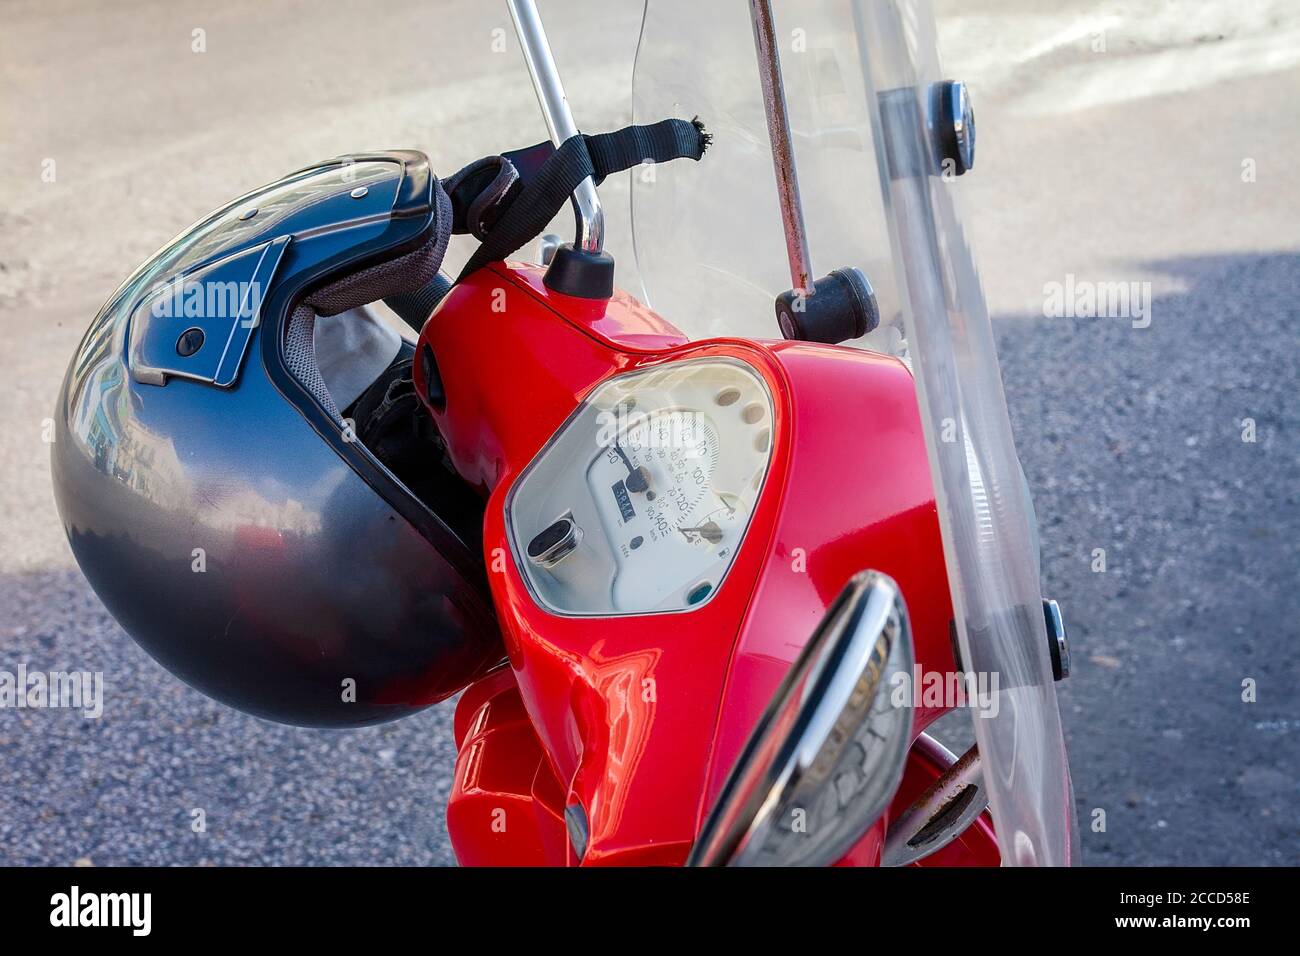 Red Scooter. Isolated, Close up of red motorcycle with helmet hanging over the chrome bar. Stock Image. Stock Photo